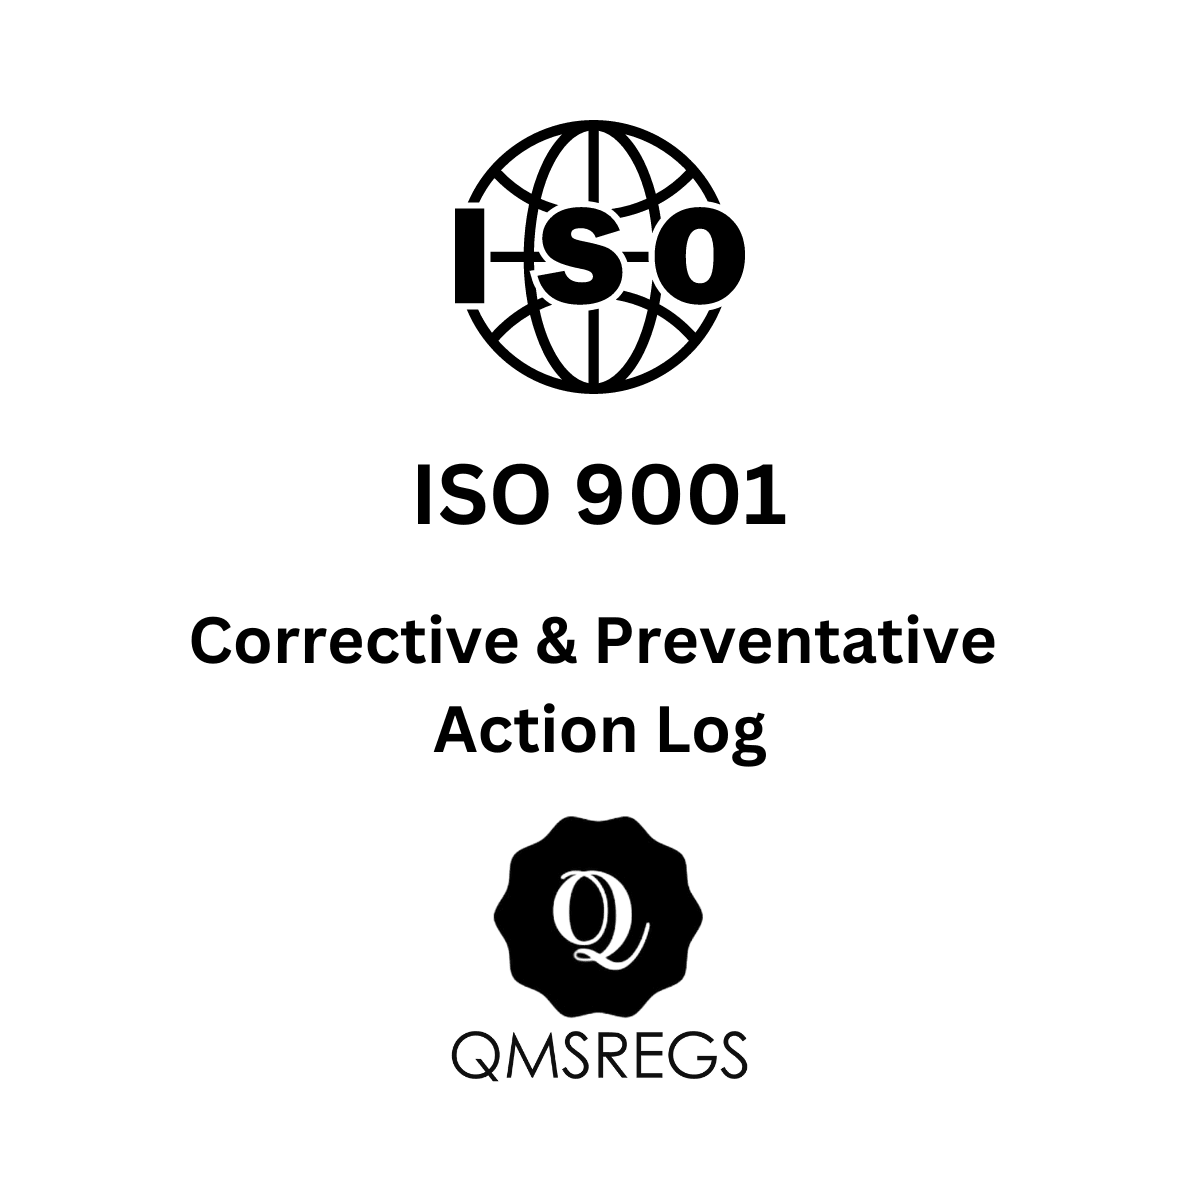 ISO 9001 Corrective and Preventative Action (CAPA) Log